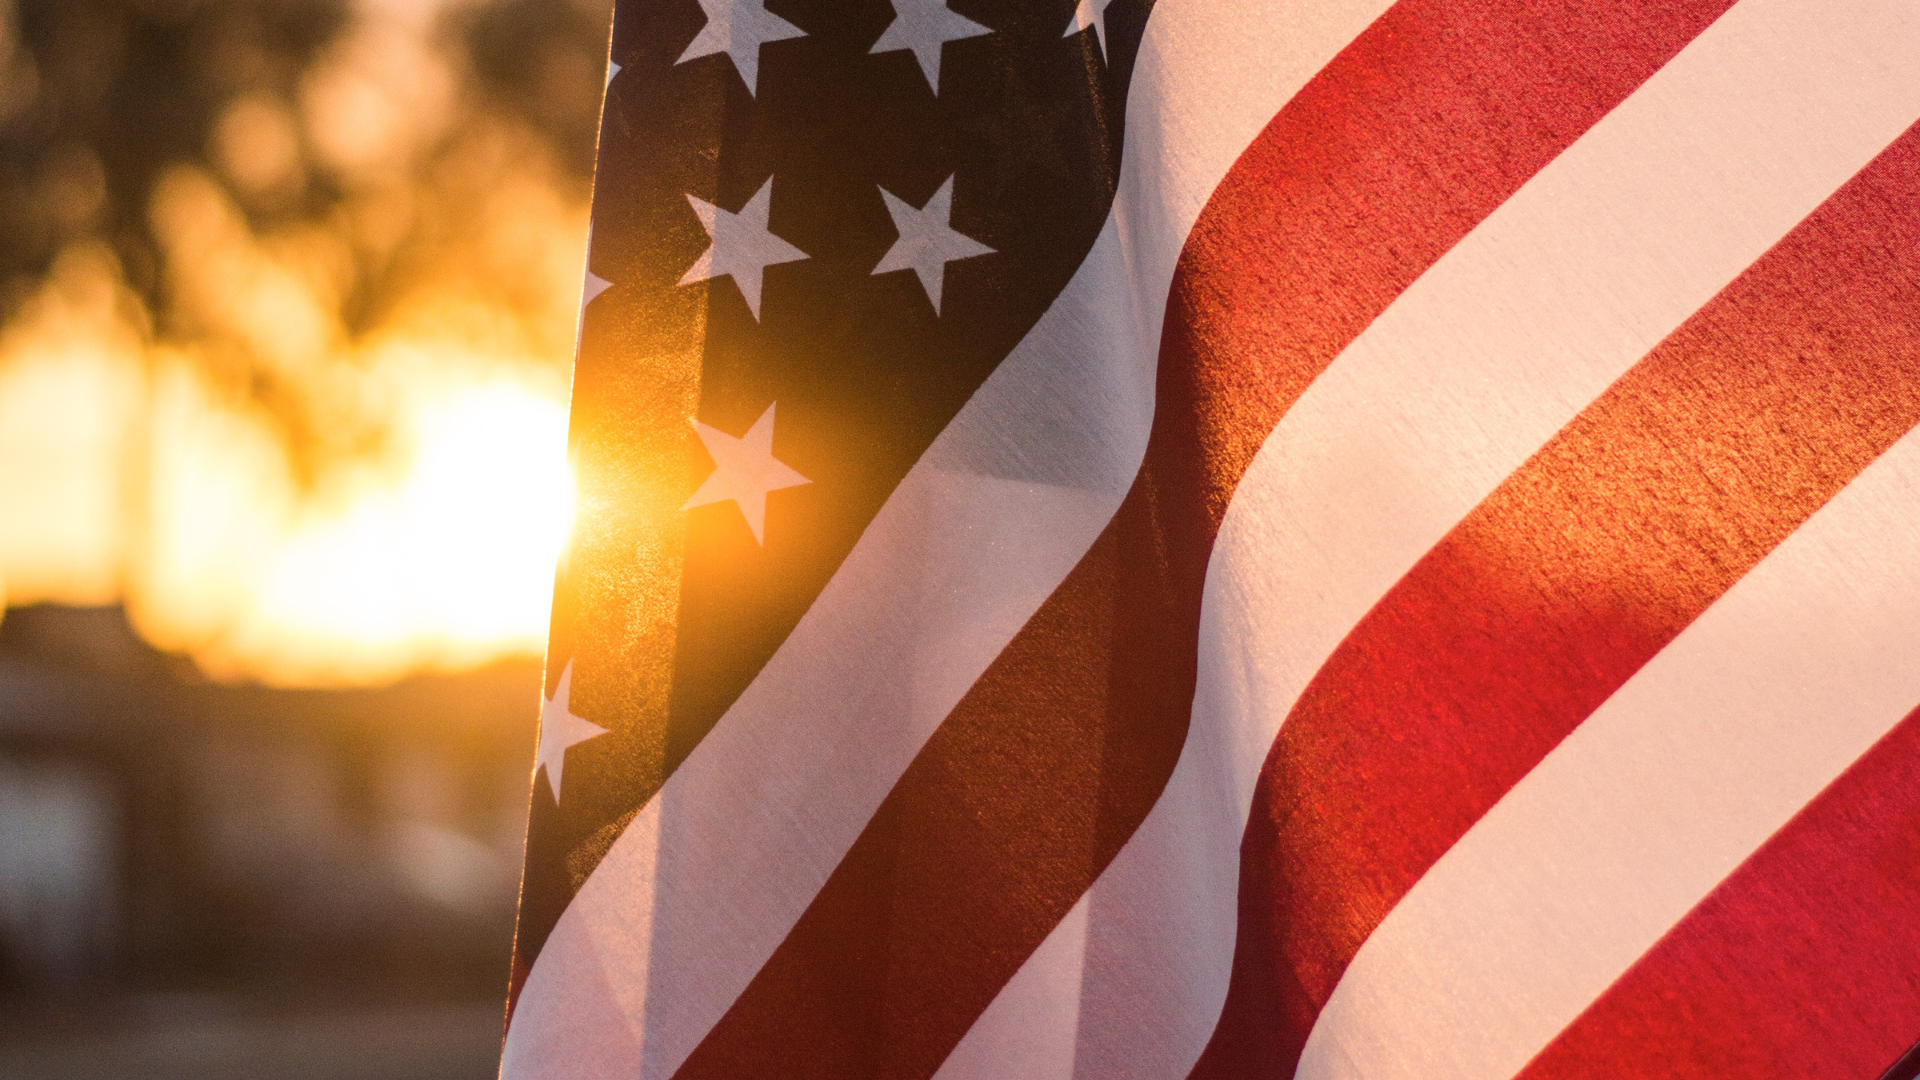 A closeup of the American flag during sunset hour